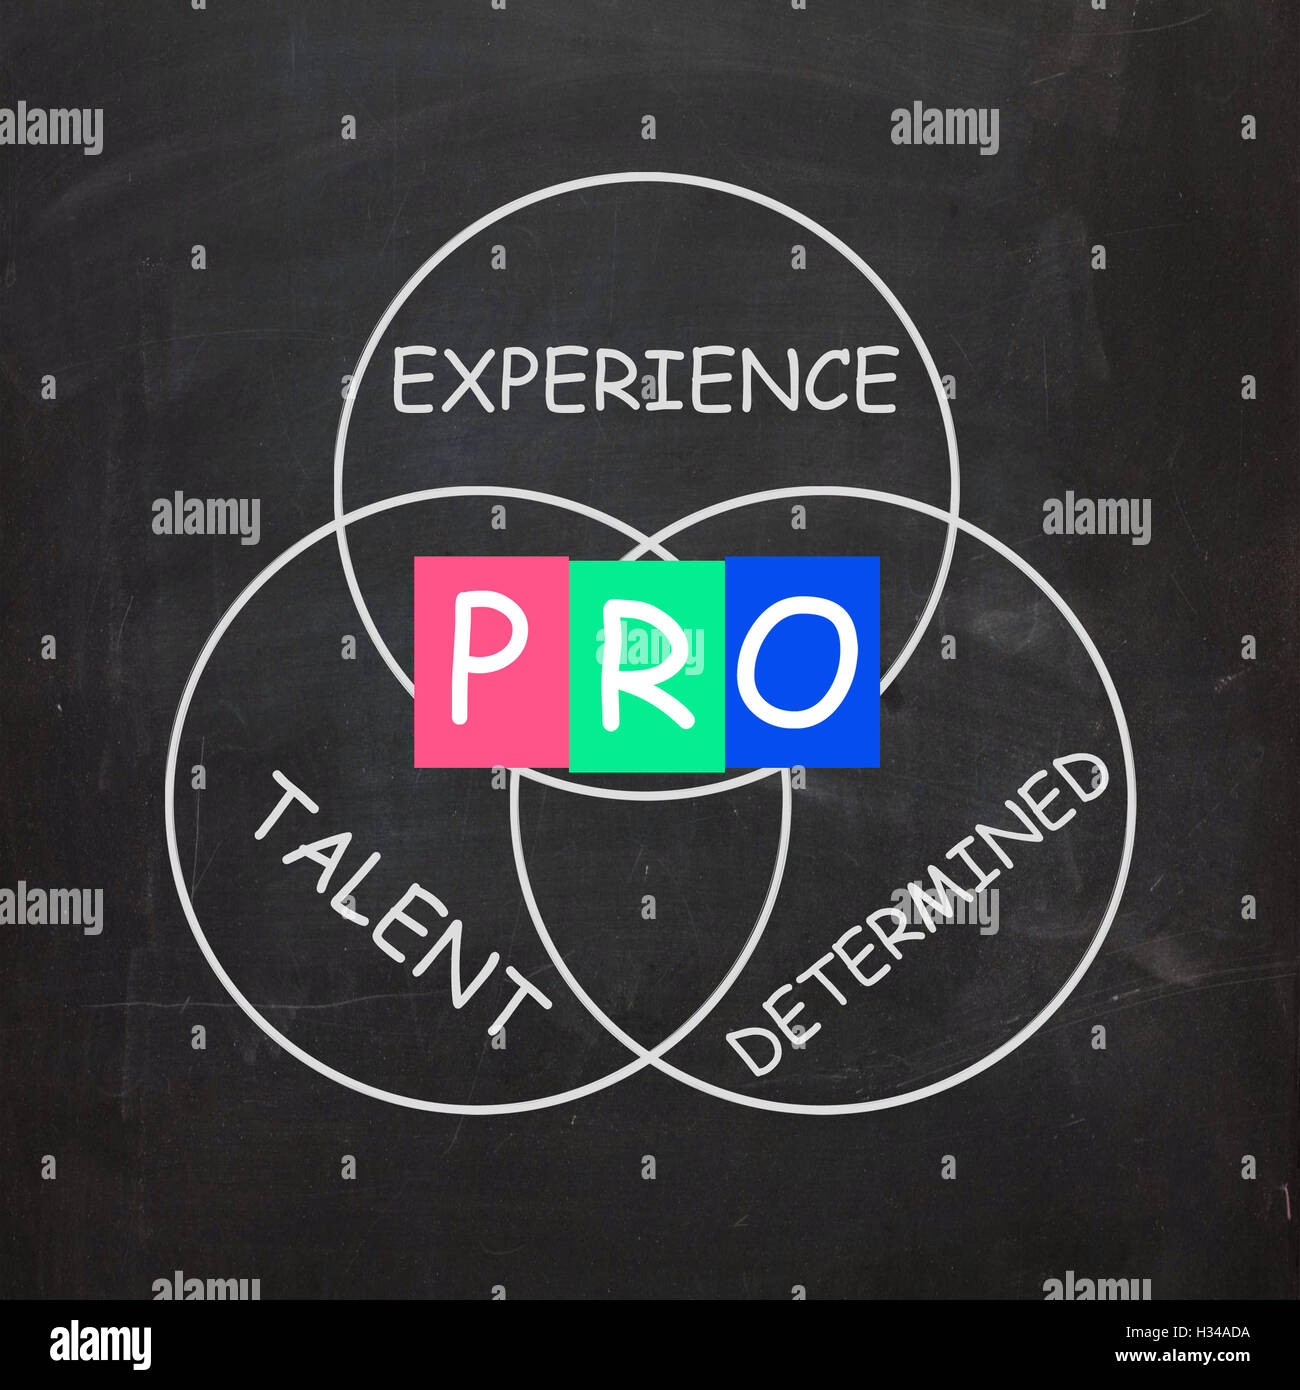 PRO On Blackboard Means Great Experience And Excellence Stock Photo